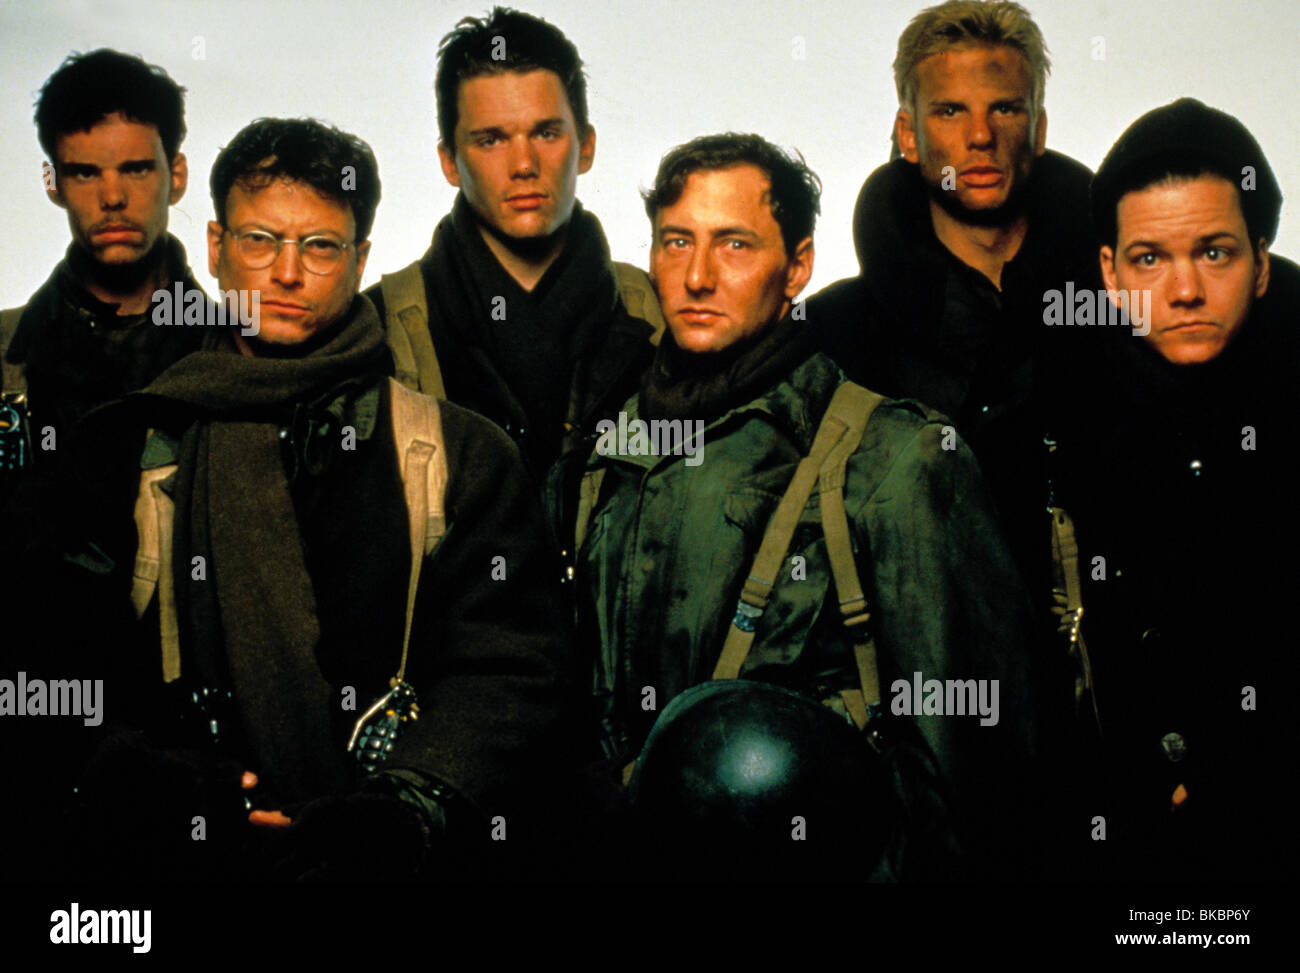 A MIDNIGHT CLEAR (1992) KEVIN DILLON, GARY SINISE, ETHAN HAWKE, ARYE GROSS, PETER BERG, FRANCK WHALLEY MMDC 018 Stock Photo